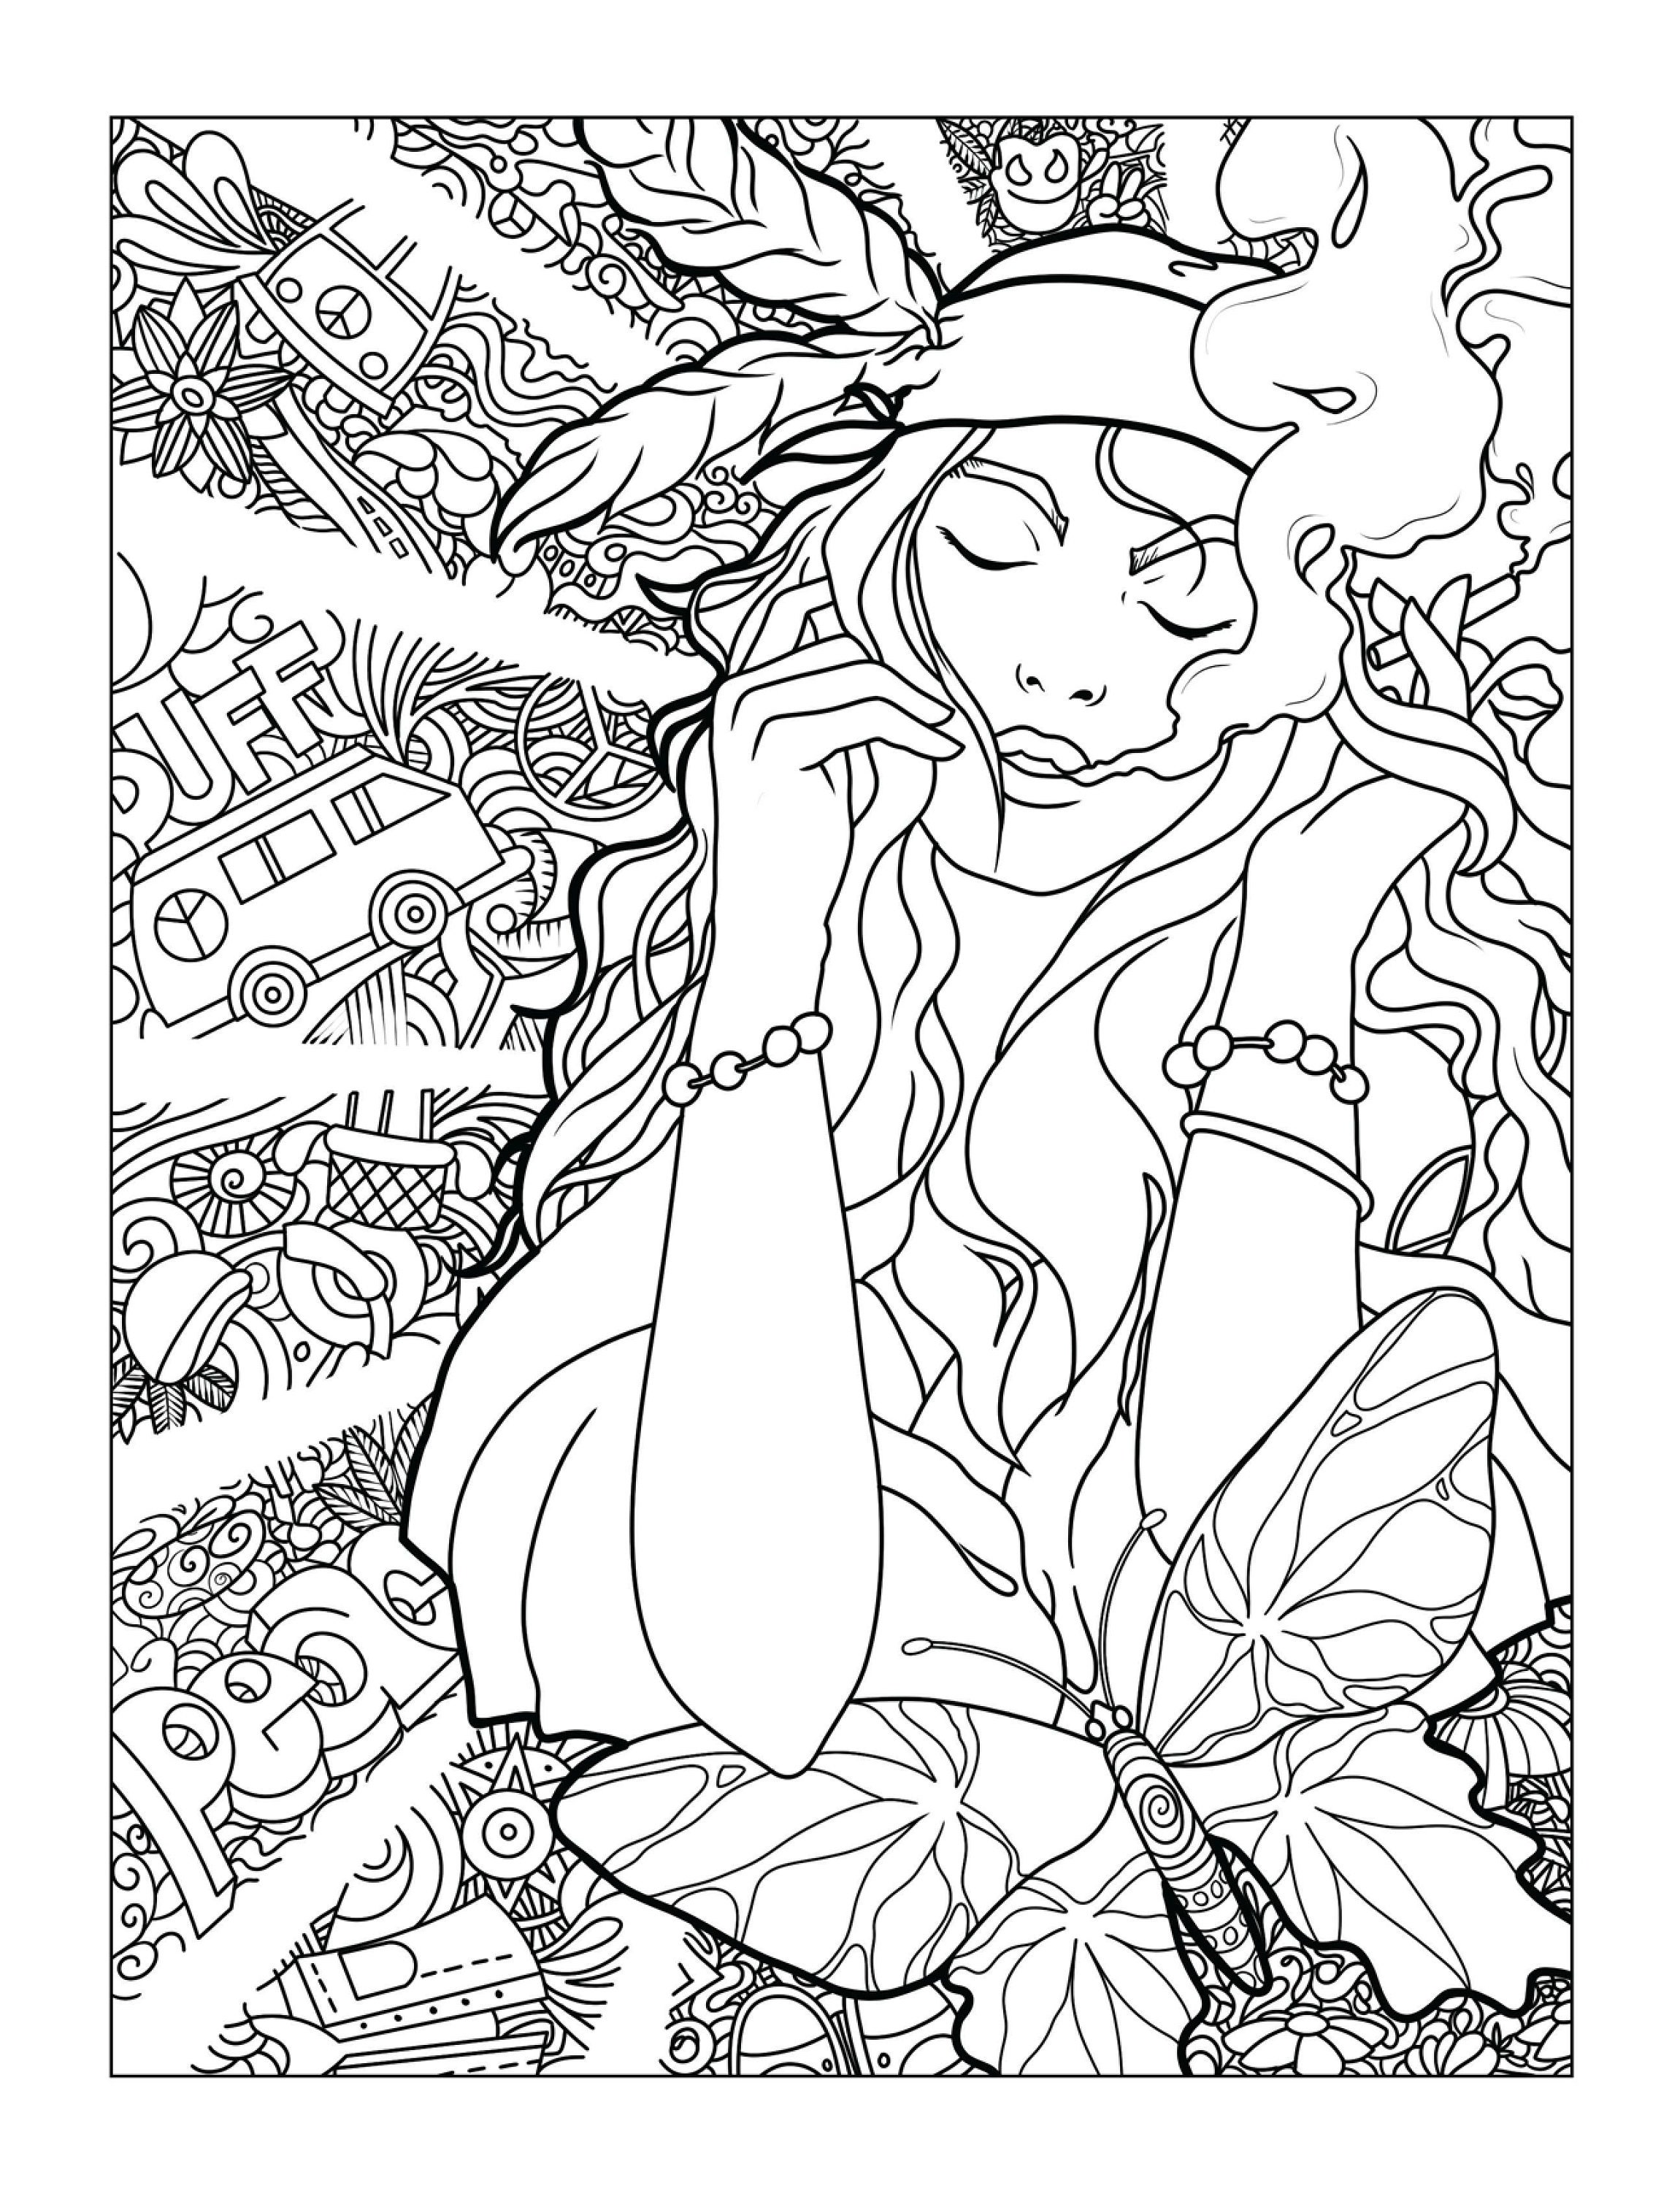 Trippy Stoner Printable Coloring Pages 14 Digital Downloads - Etsy